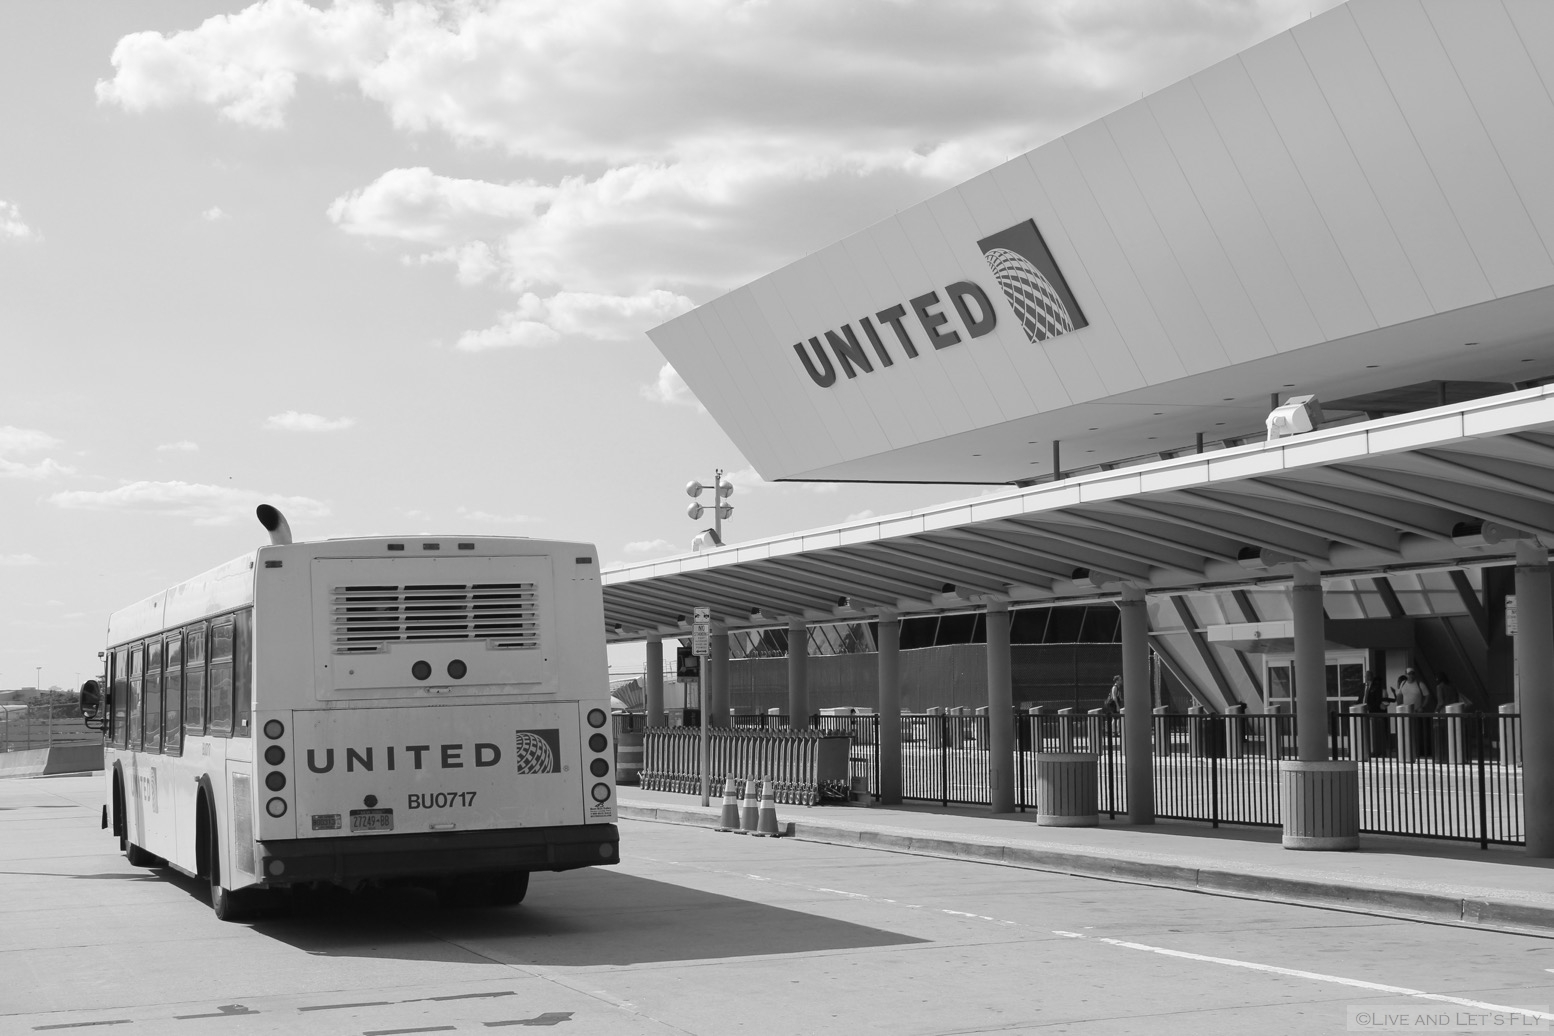 What partners does United Airlines have for its frequent flyer program?